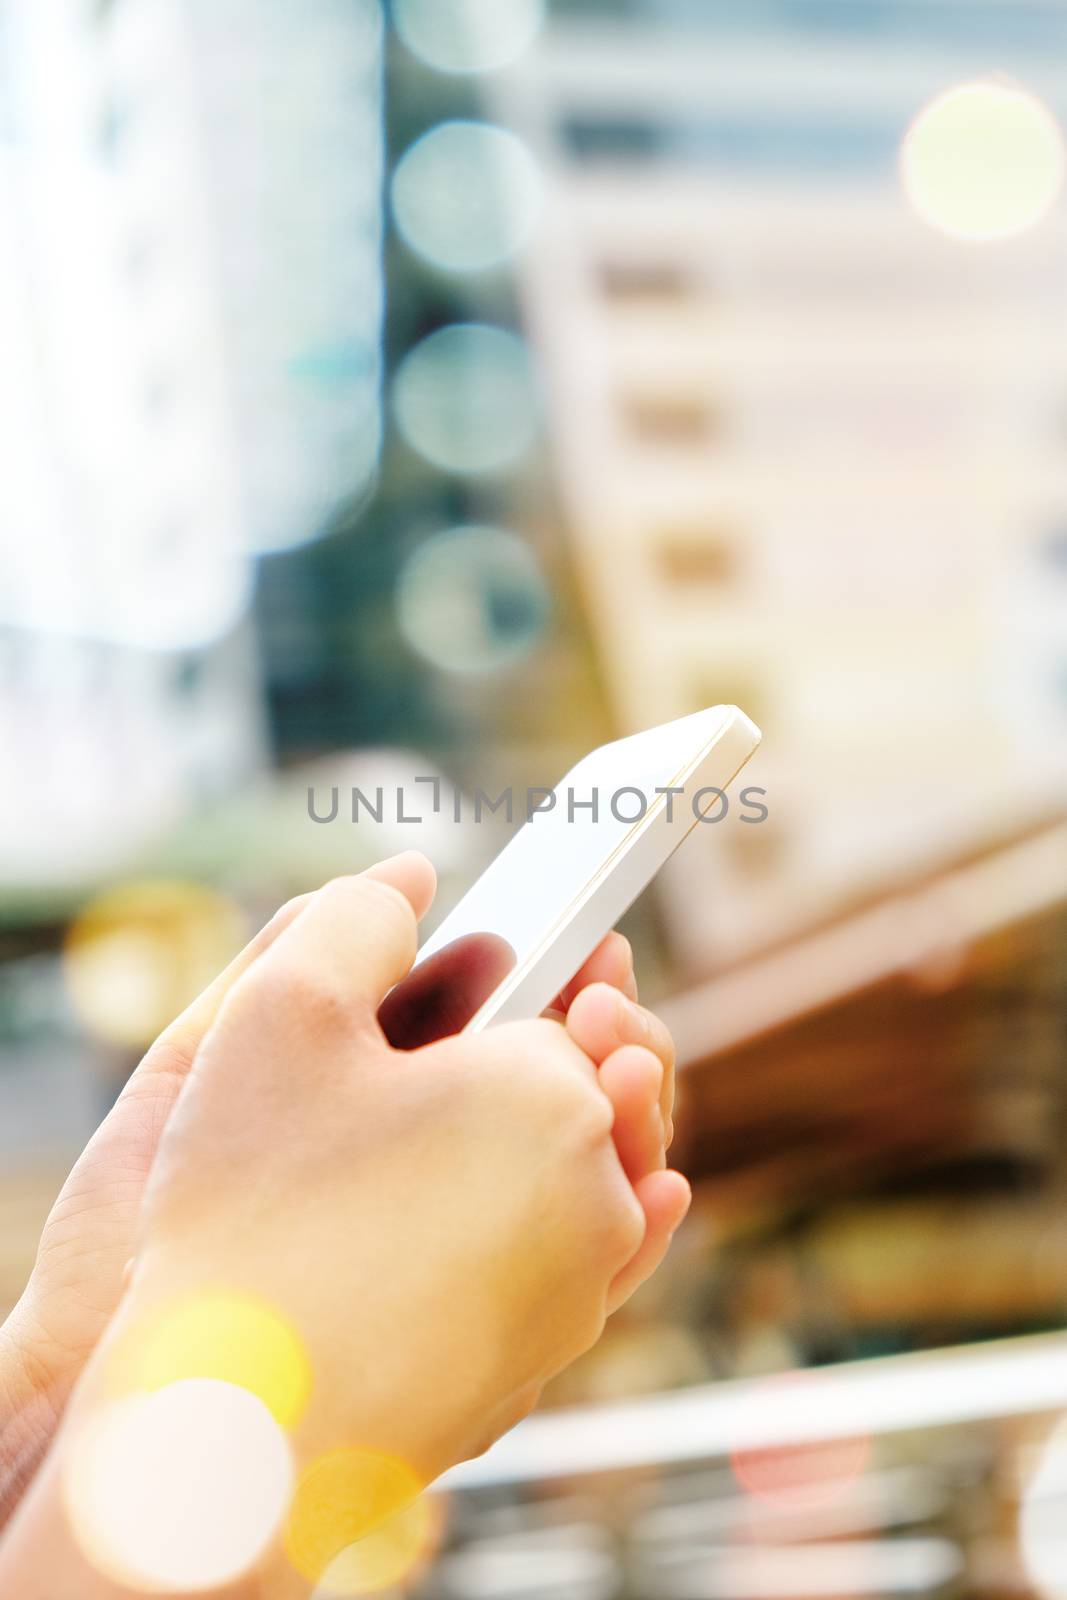 People Using a Smart Phone background,Communication technology,Social media life